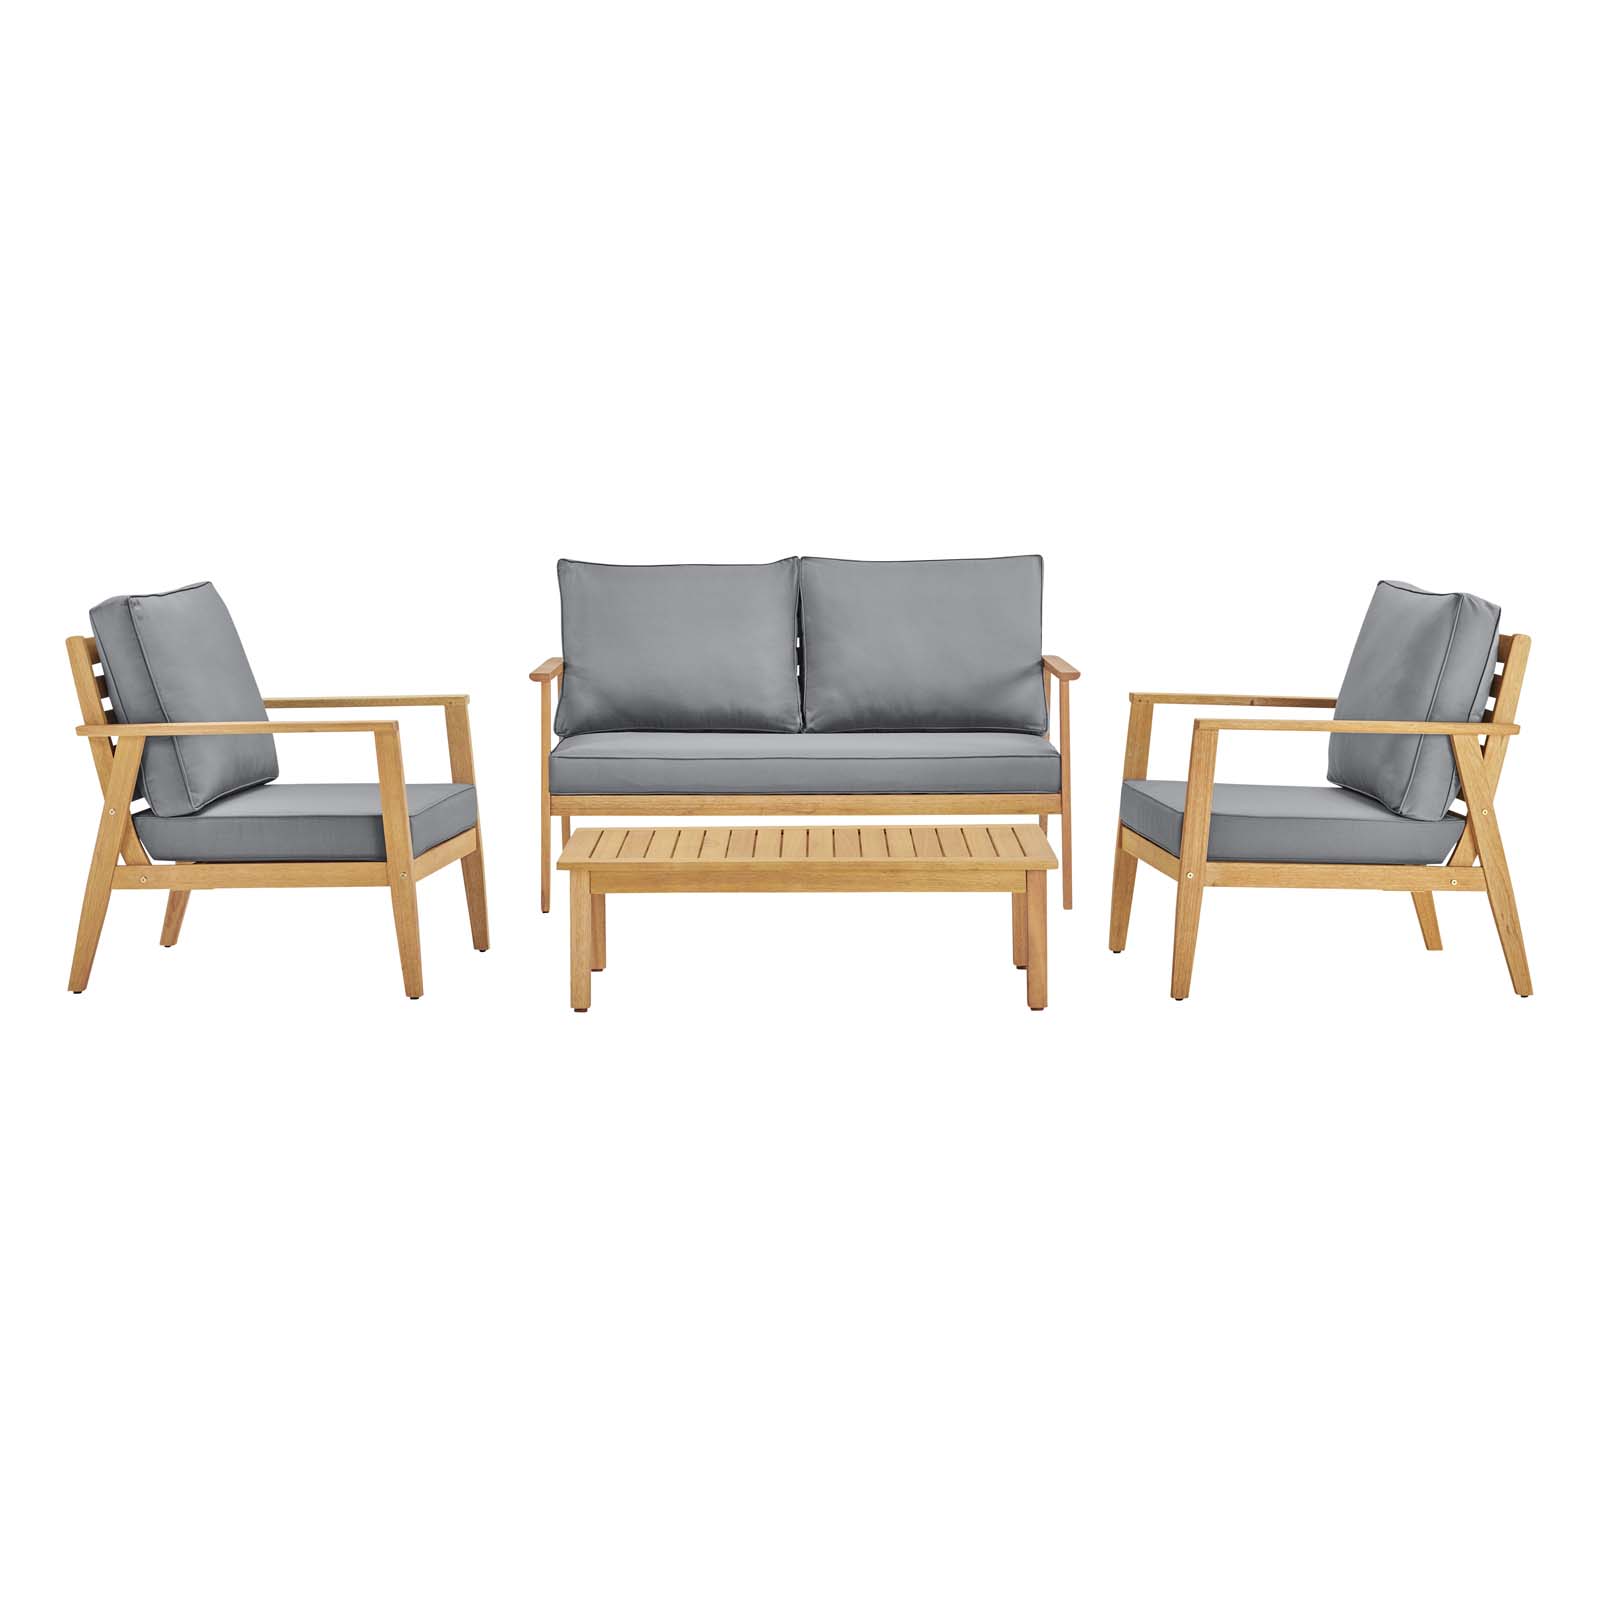 Modway Syracuse Outdoor Patio Upholstered 4 Piece Furniture Set in Natural Gray - image 2 of 4